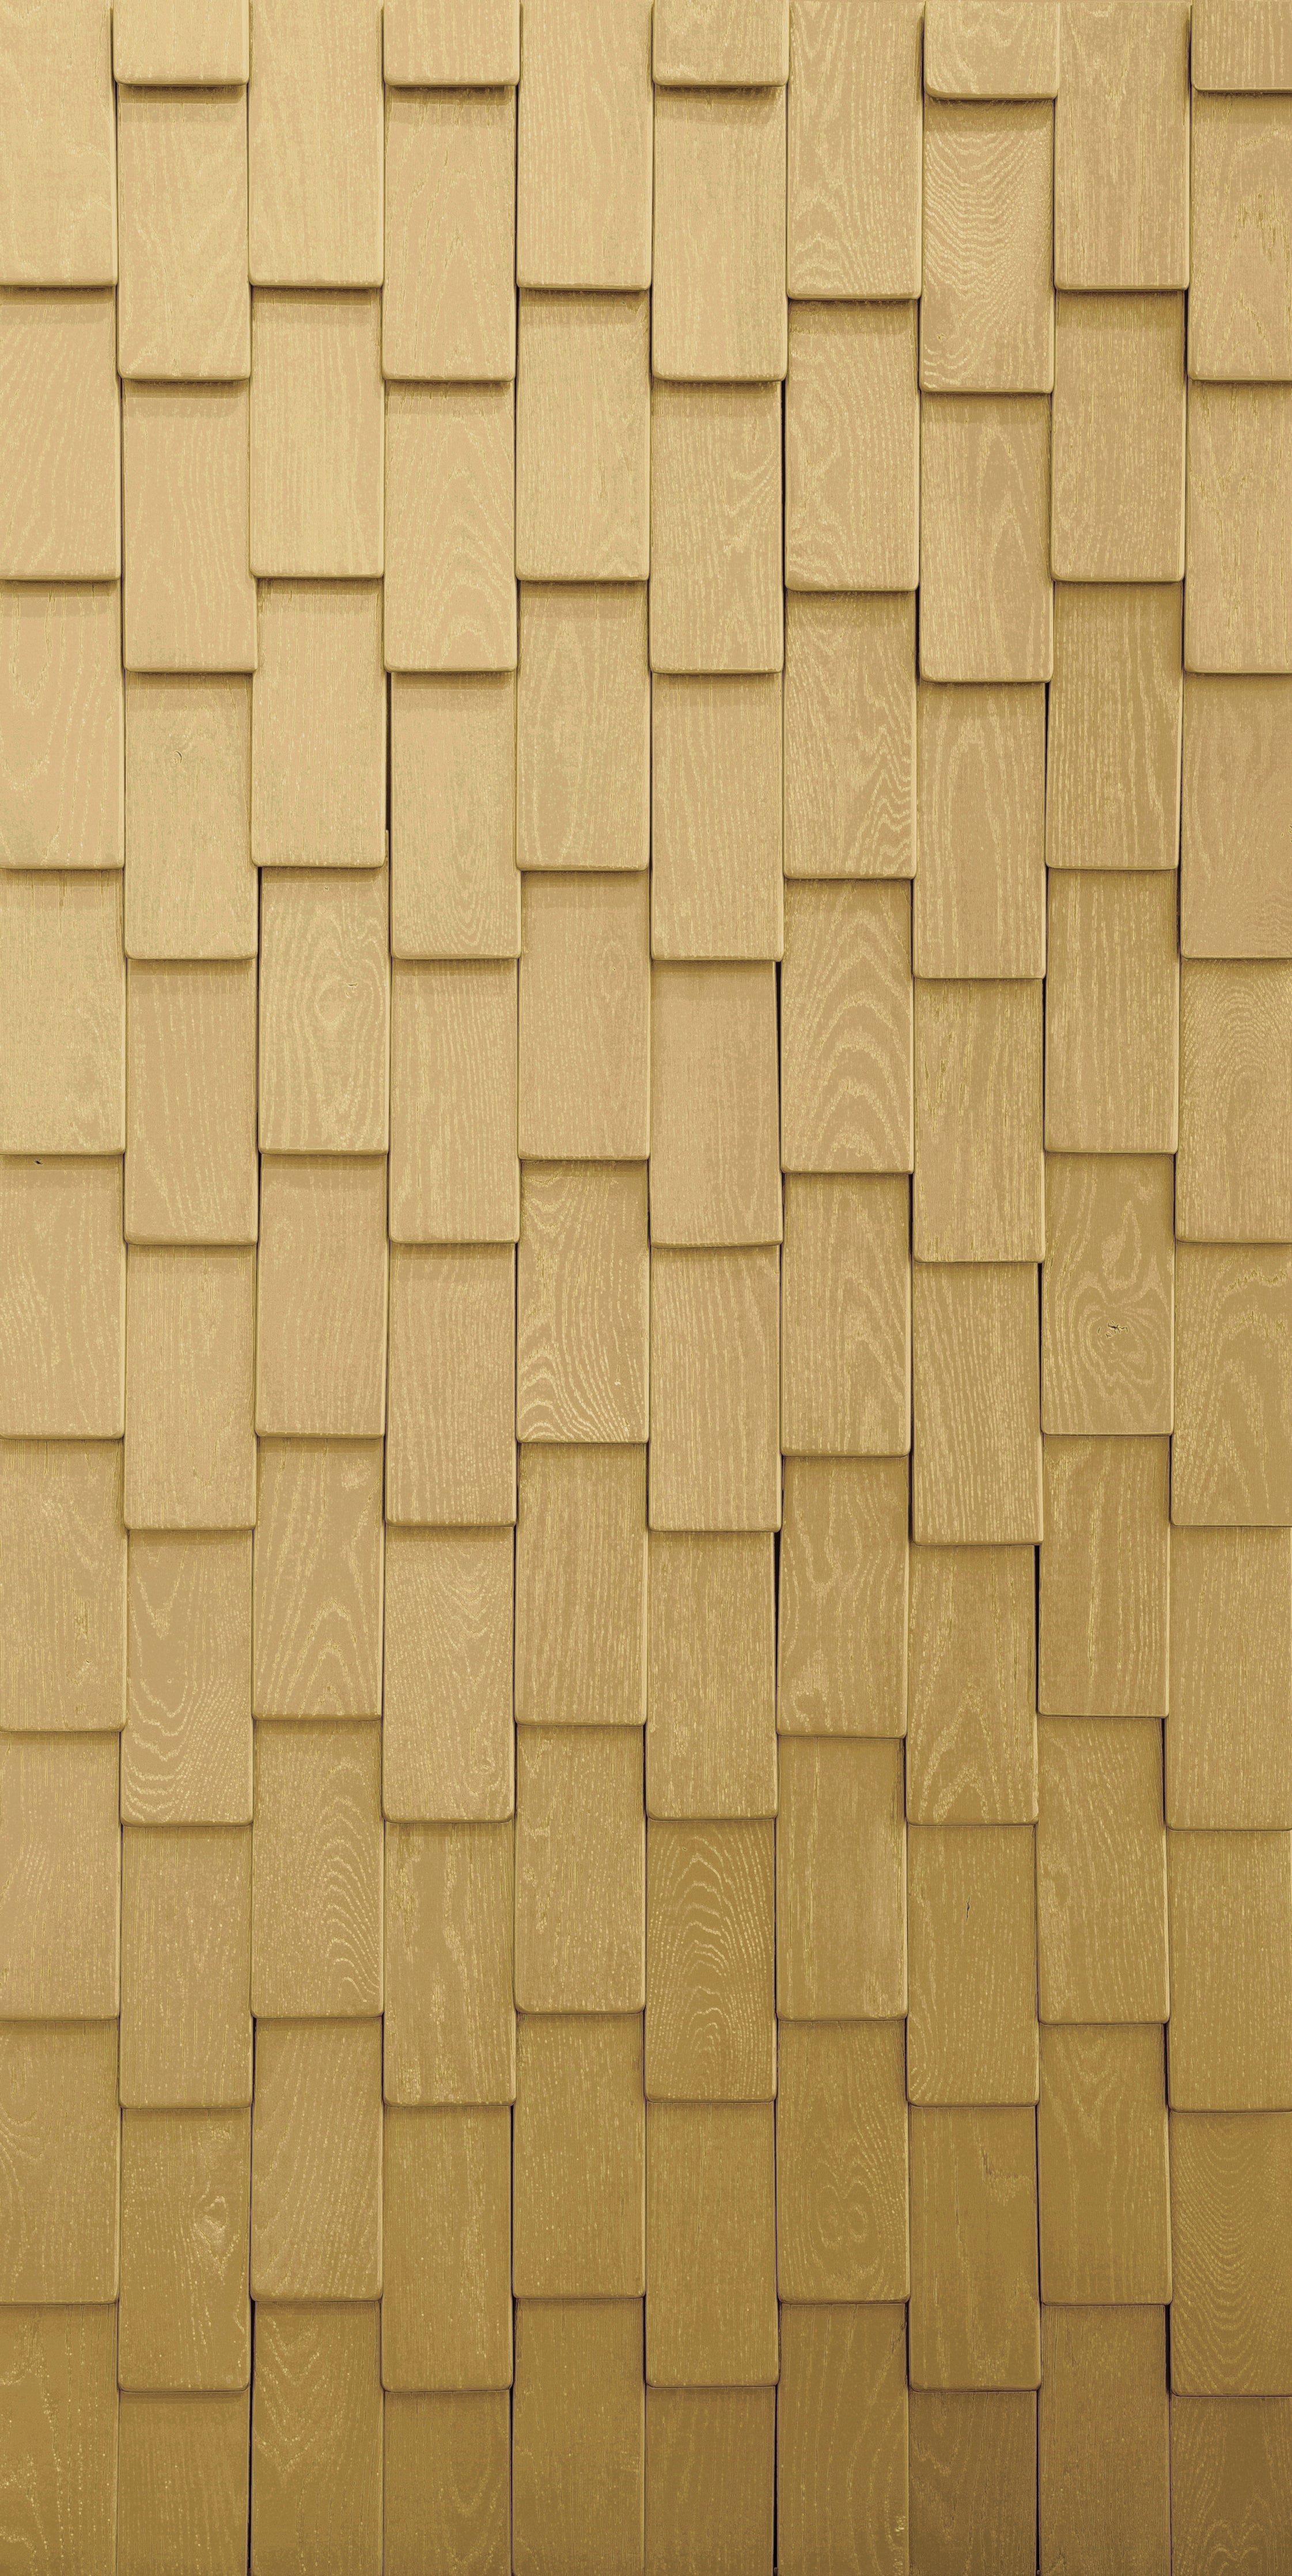 duchateau inceptiv scale reckt gold oak three dimensional wall natural wood panel lacquer for interior use distributed by surface group international